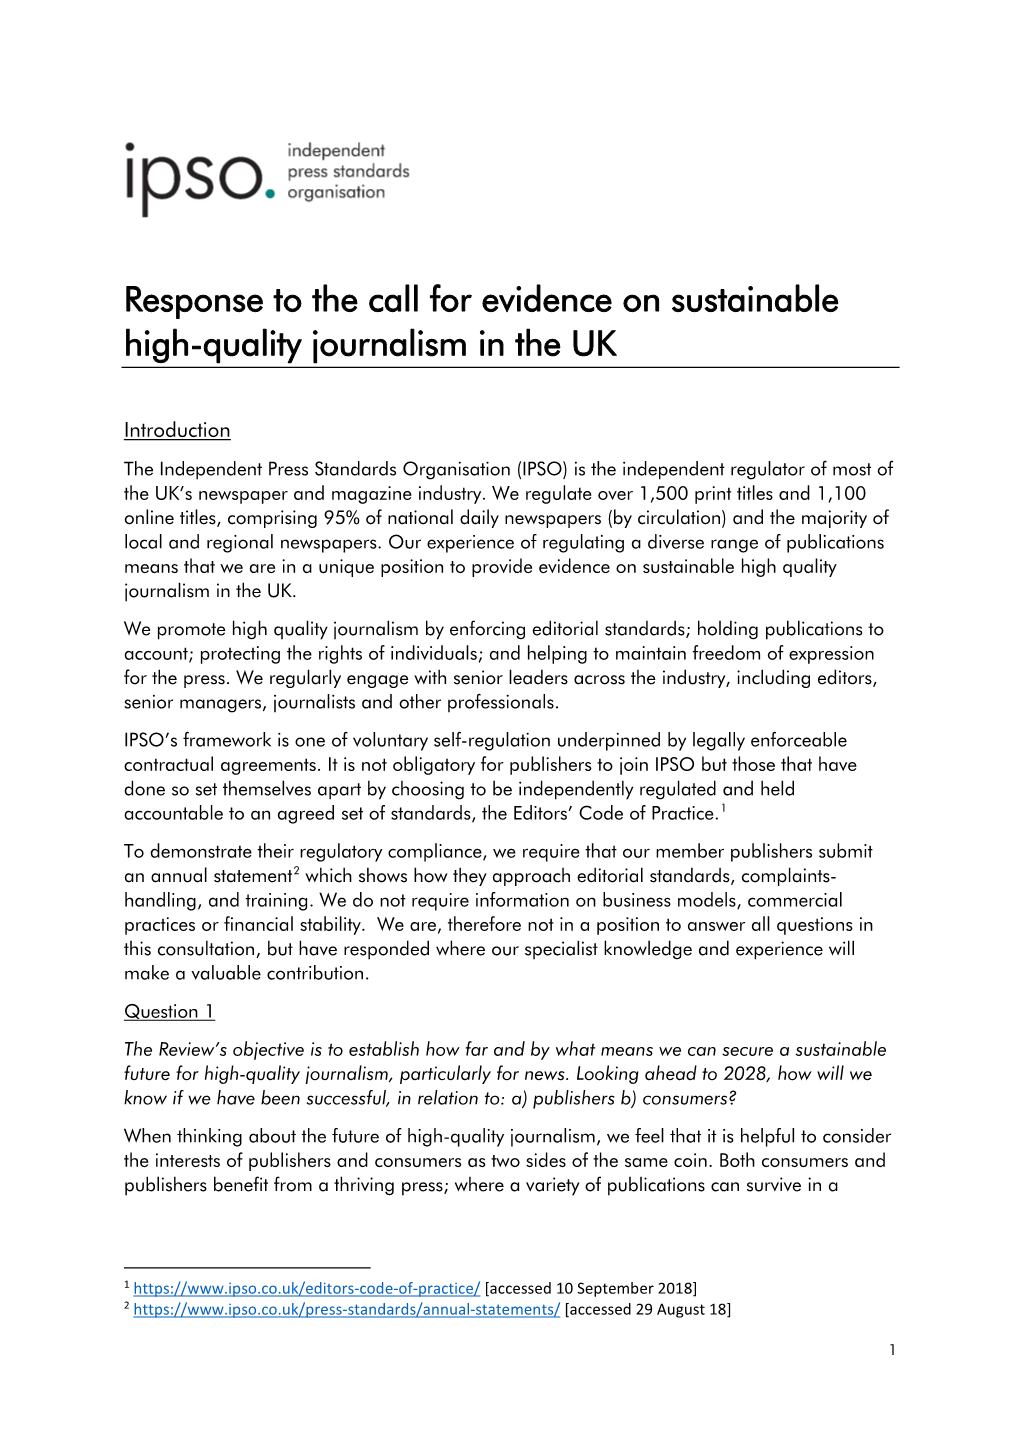 Response to the Call for Evidence on Sustainable High-Quality Journalism in the UK